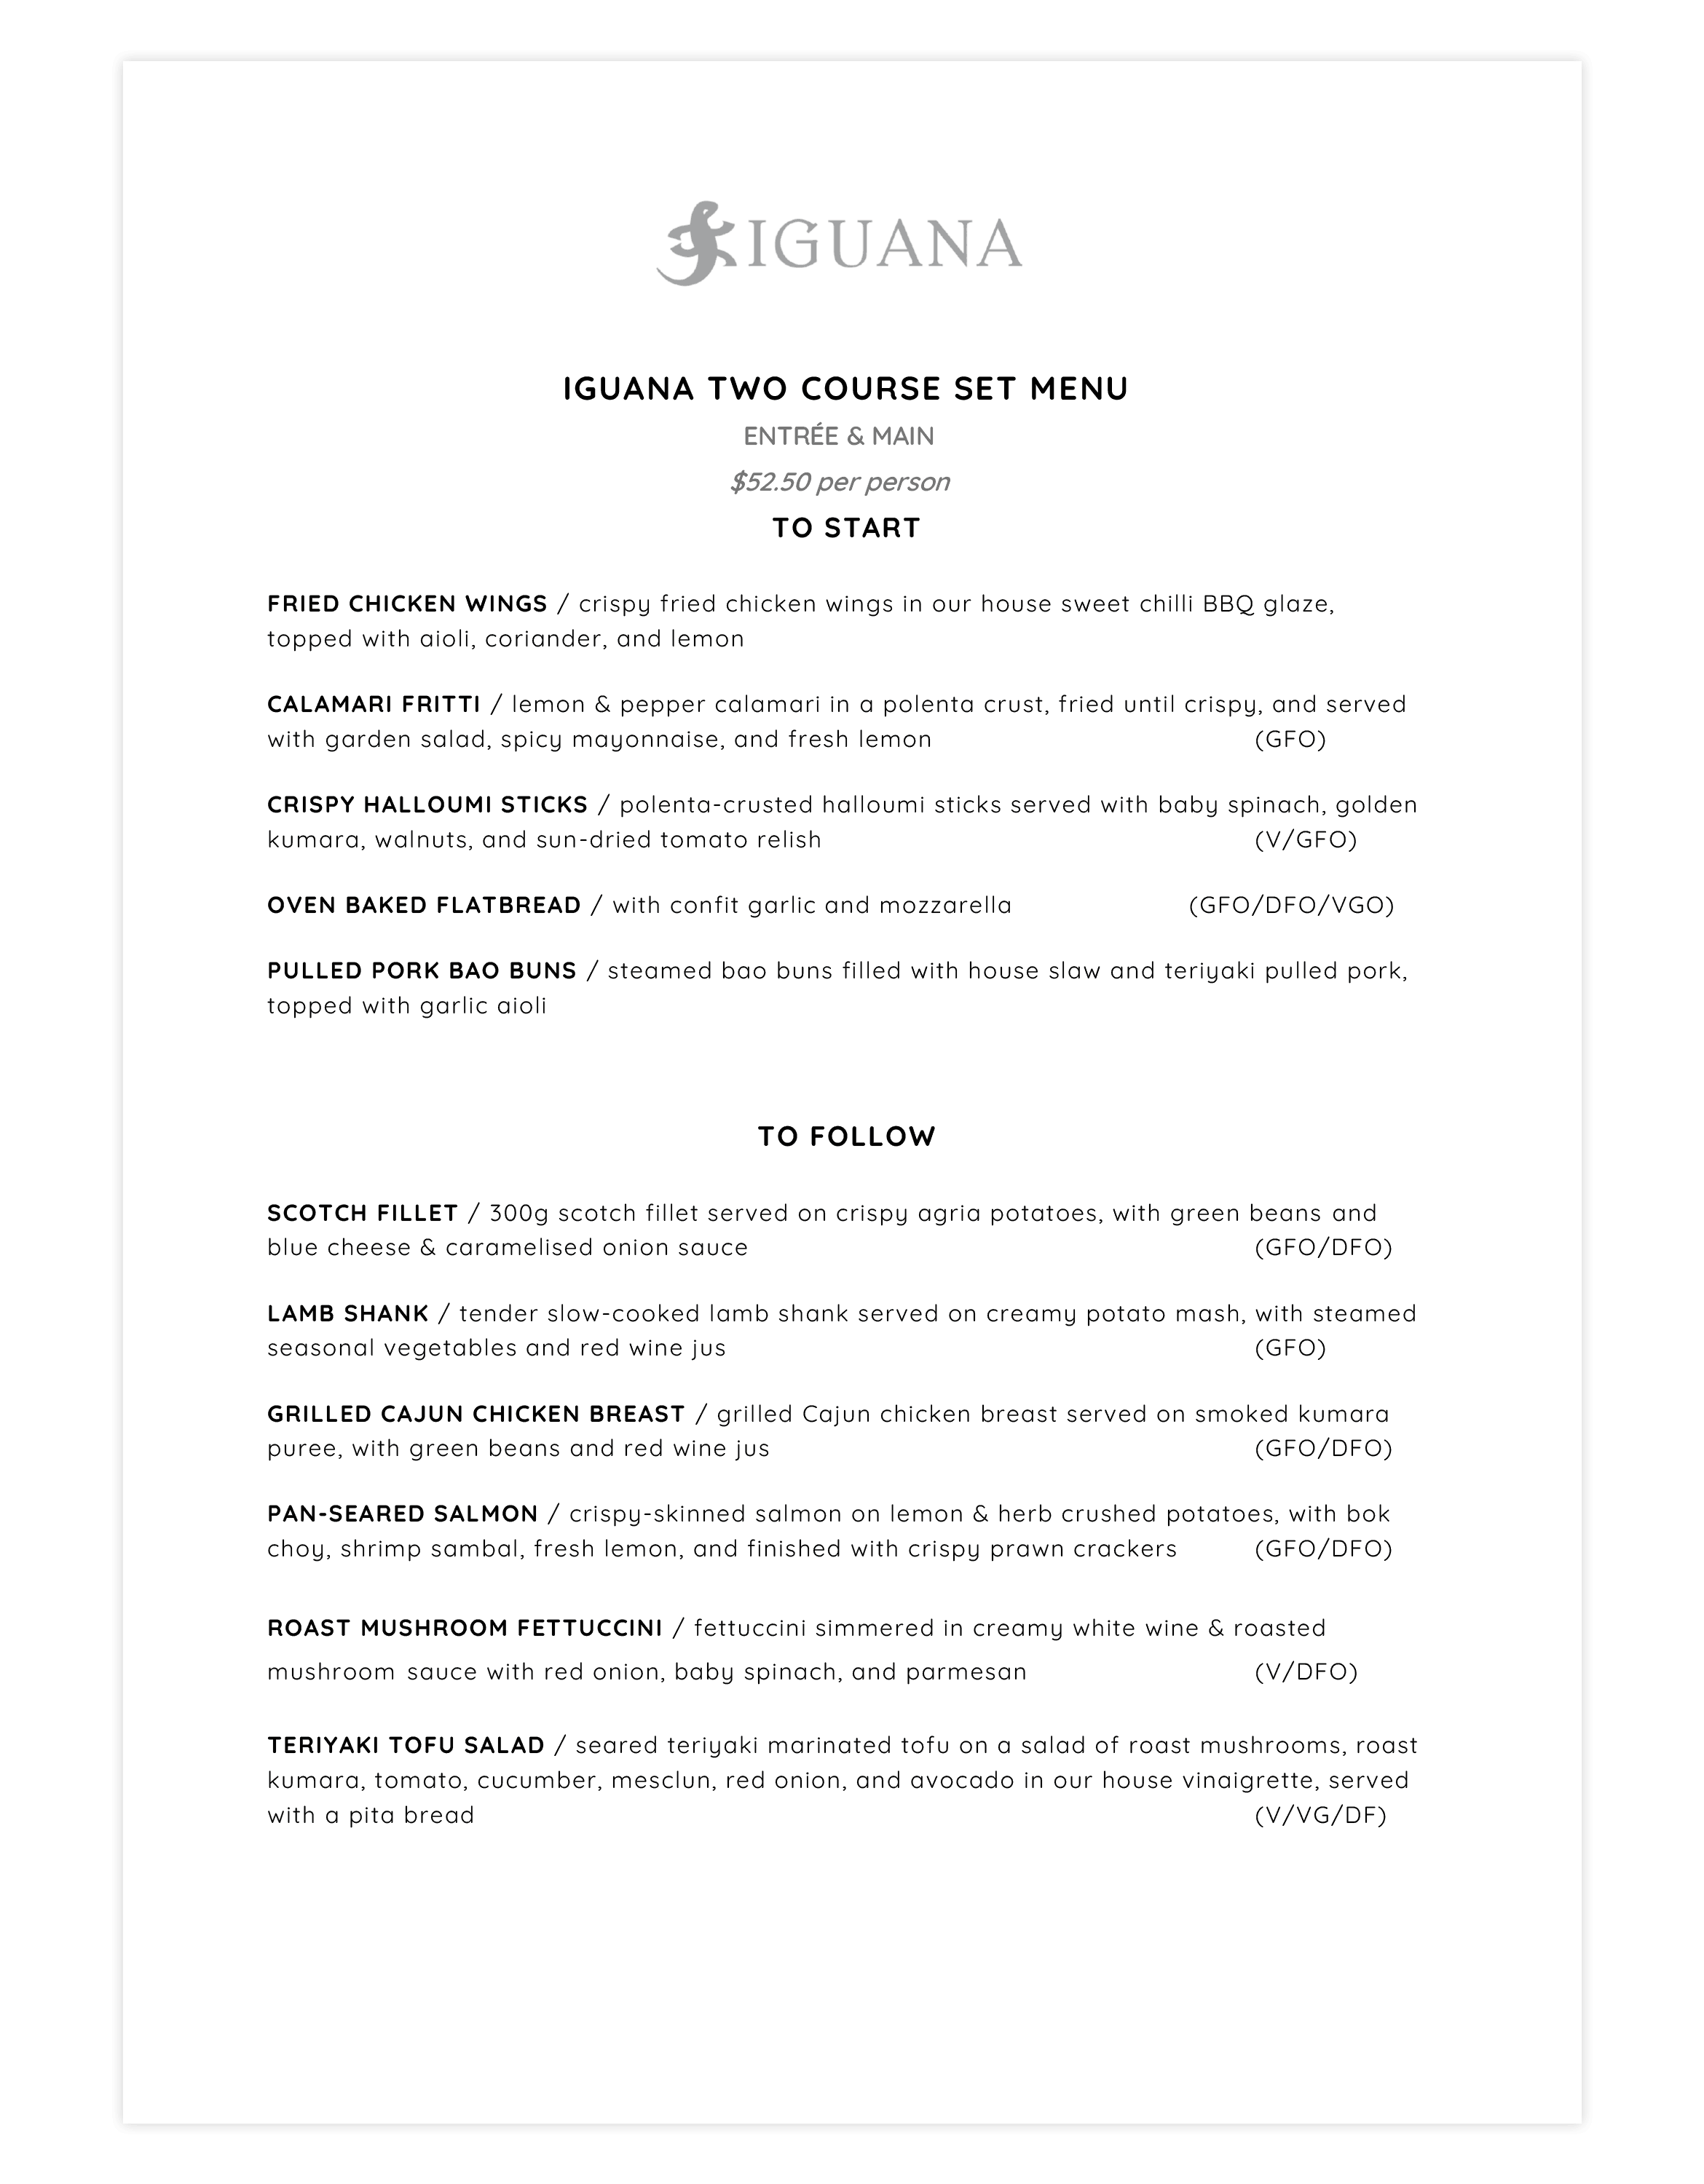 Iguana two-course set dinner menu for groups of 20+